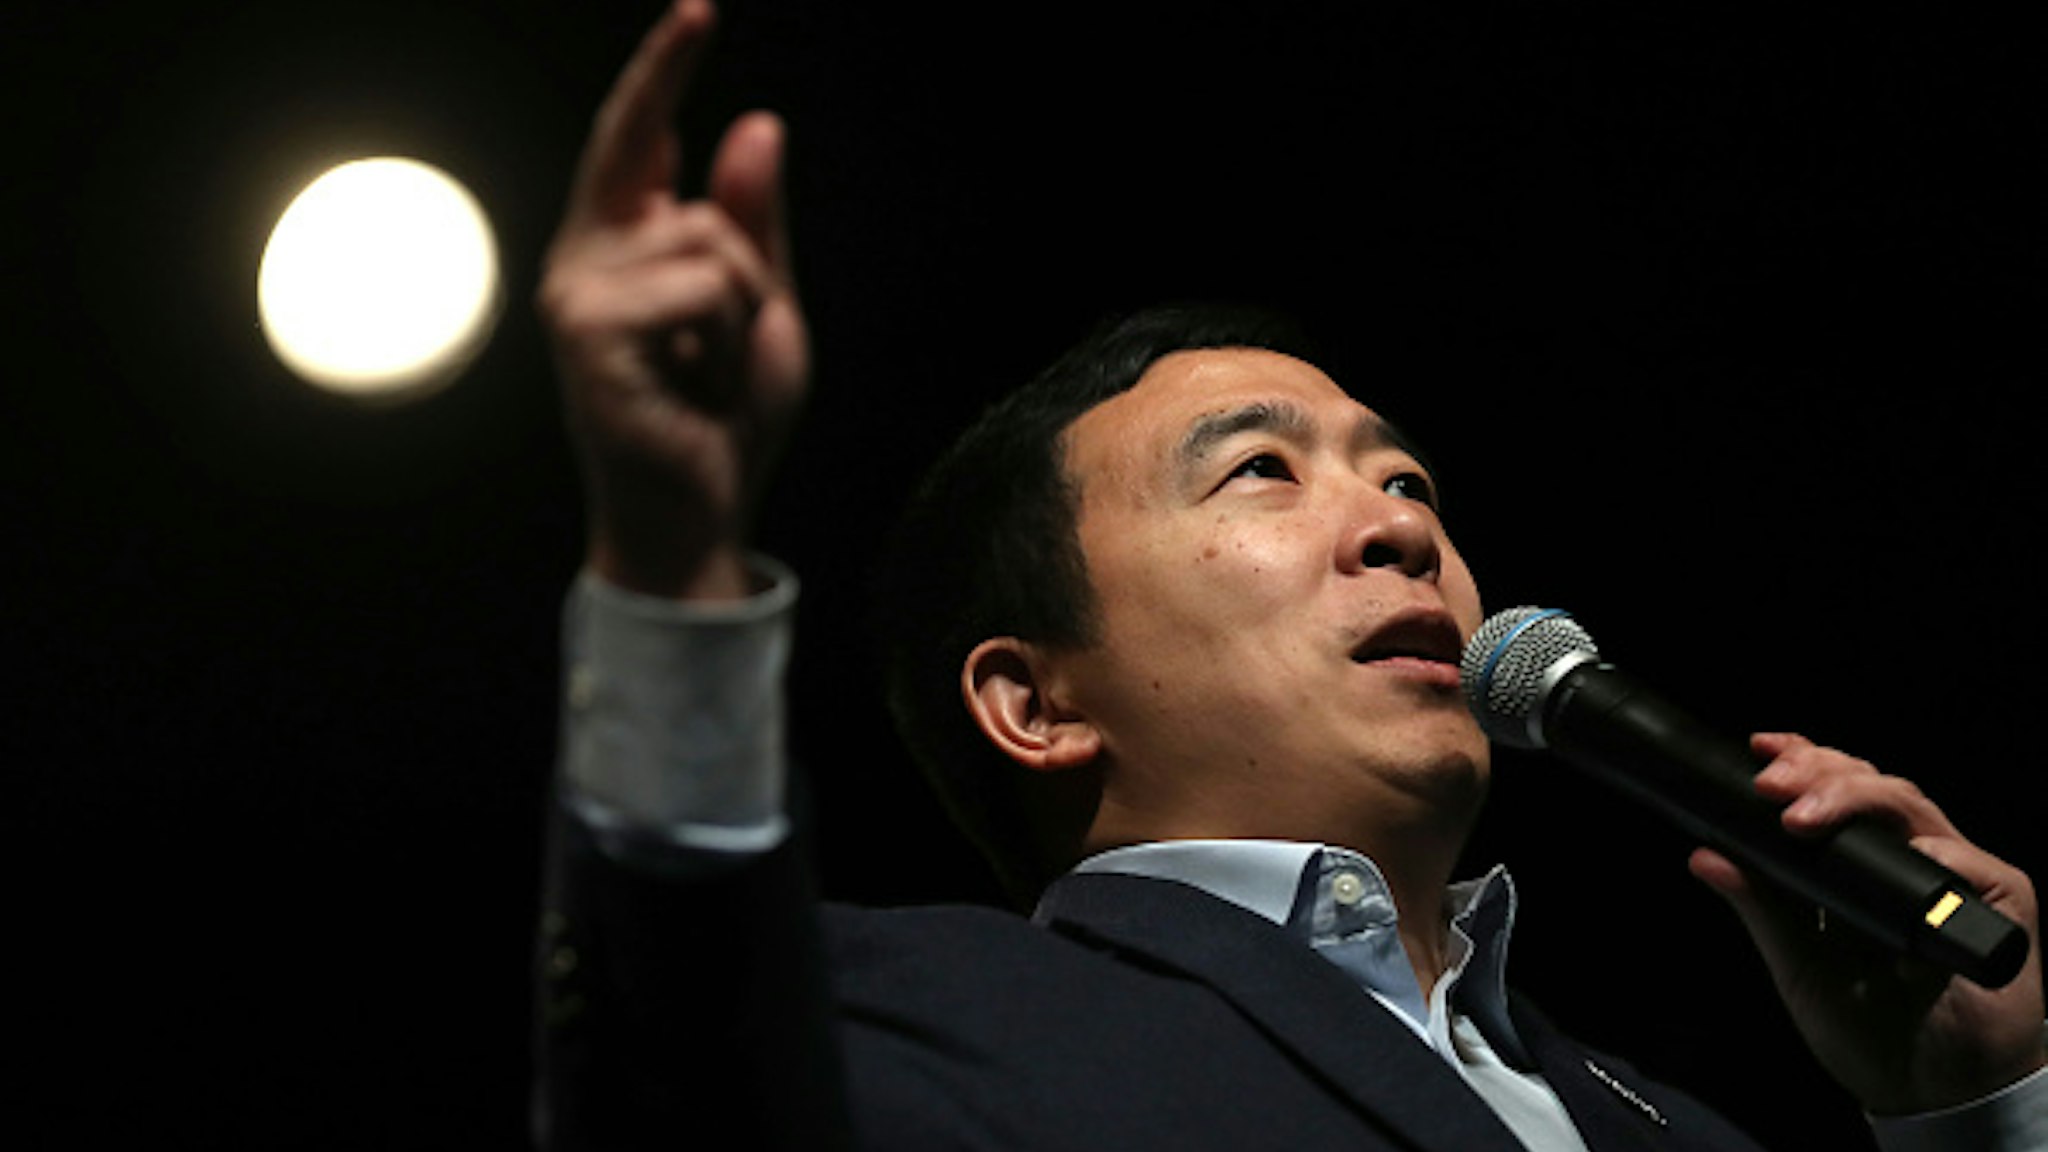 KEENE, NEW HAMPSHIRE - FEBRUARY 05: Democratic presidential candidate Andrew Yang speaks during a campaign event on February 05, 2020 in Keene, New Hampshire. With one week to go before the New Hampshire primary, Andrew Yang is campaigning throughout the state.